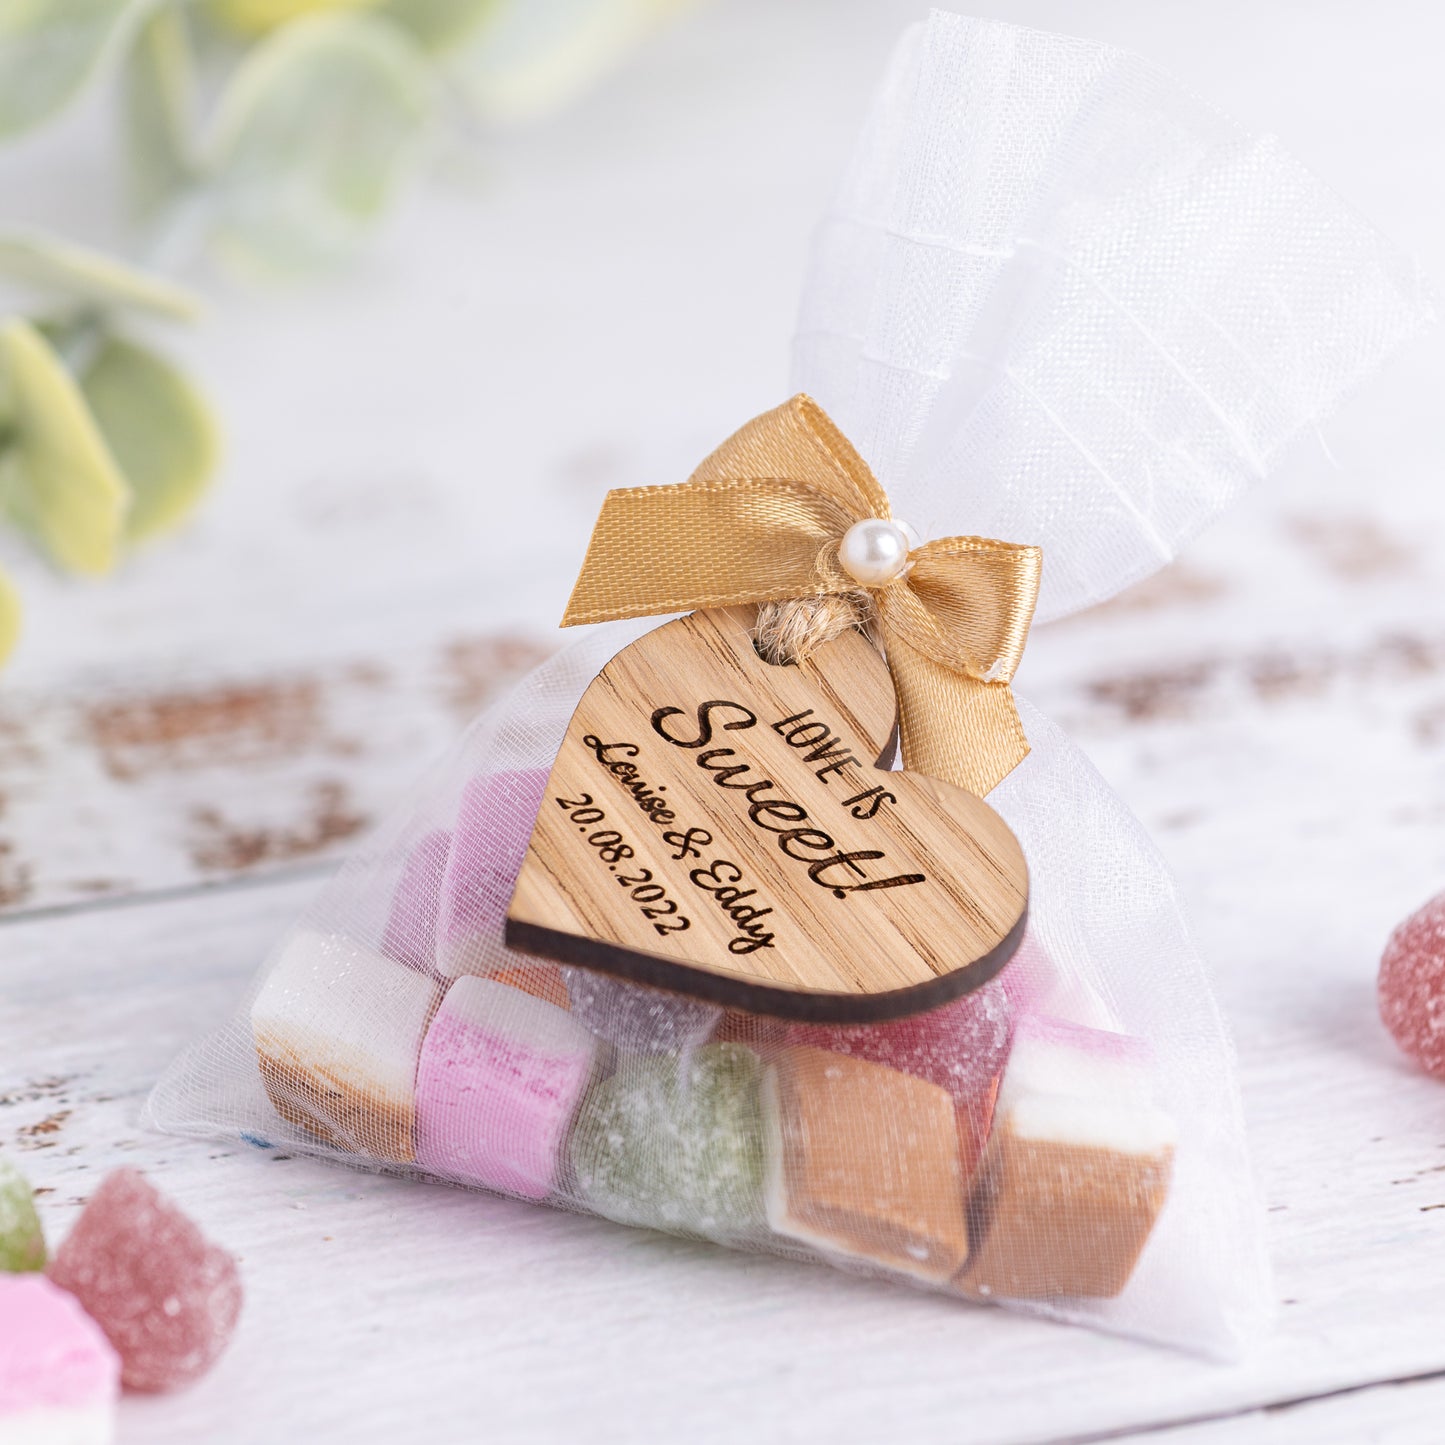 Personalised Wooden Wedding Favour Heart Tags